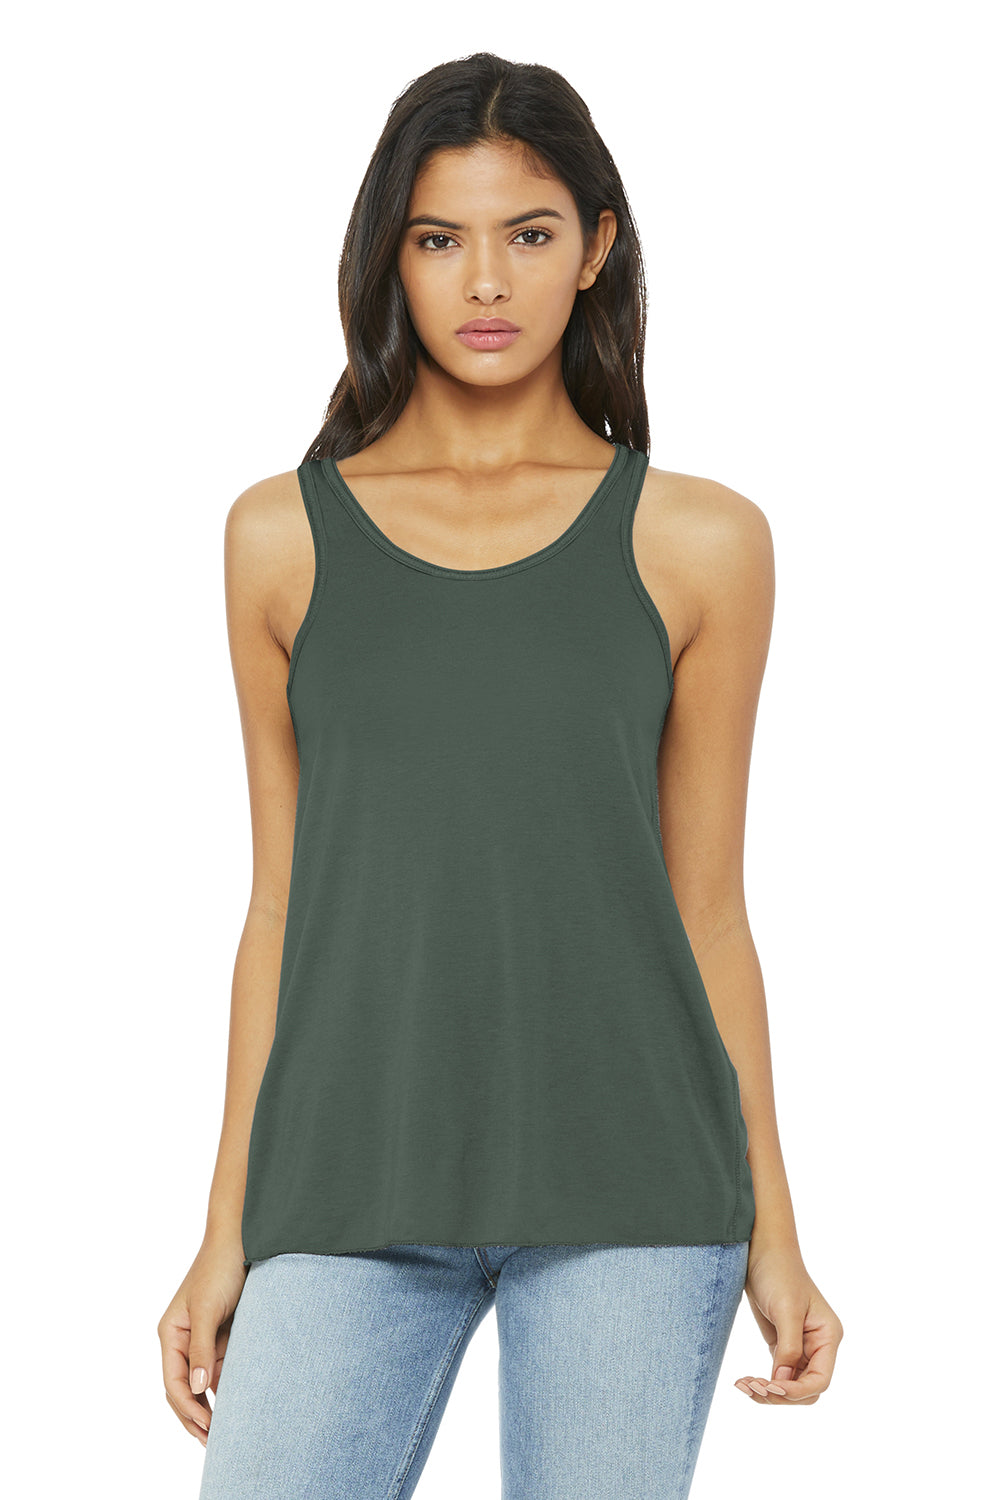 Bella + Canvas BC8800/B8800/8800 Womens Flowy Tank Top Military Green Model Front